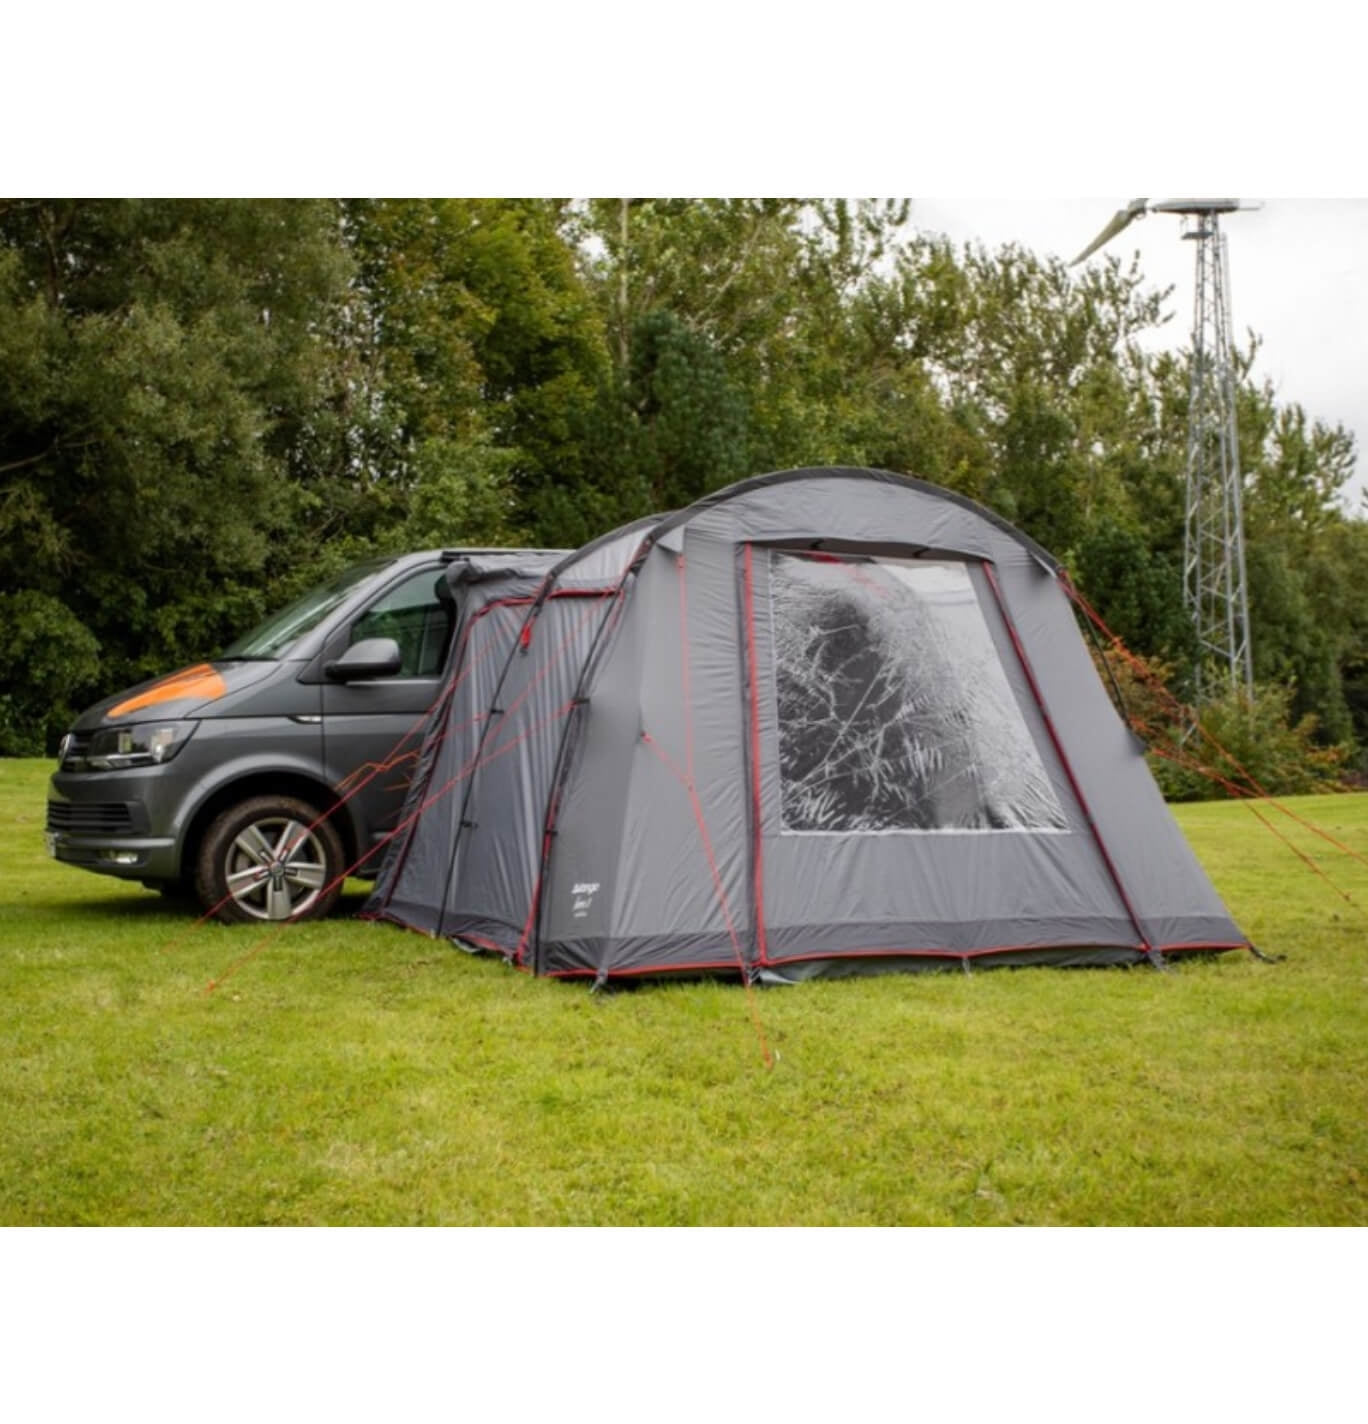 The Vango Faros closed & pitched